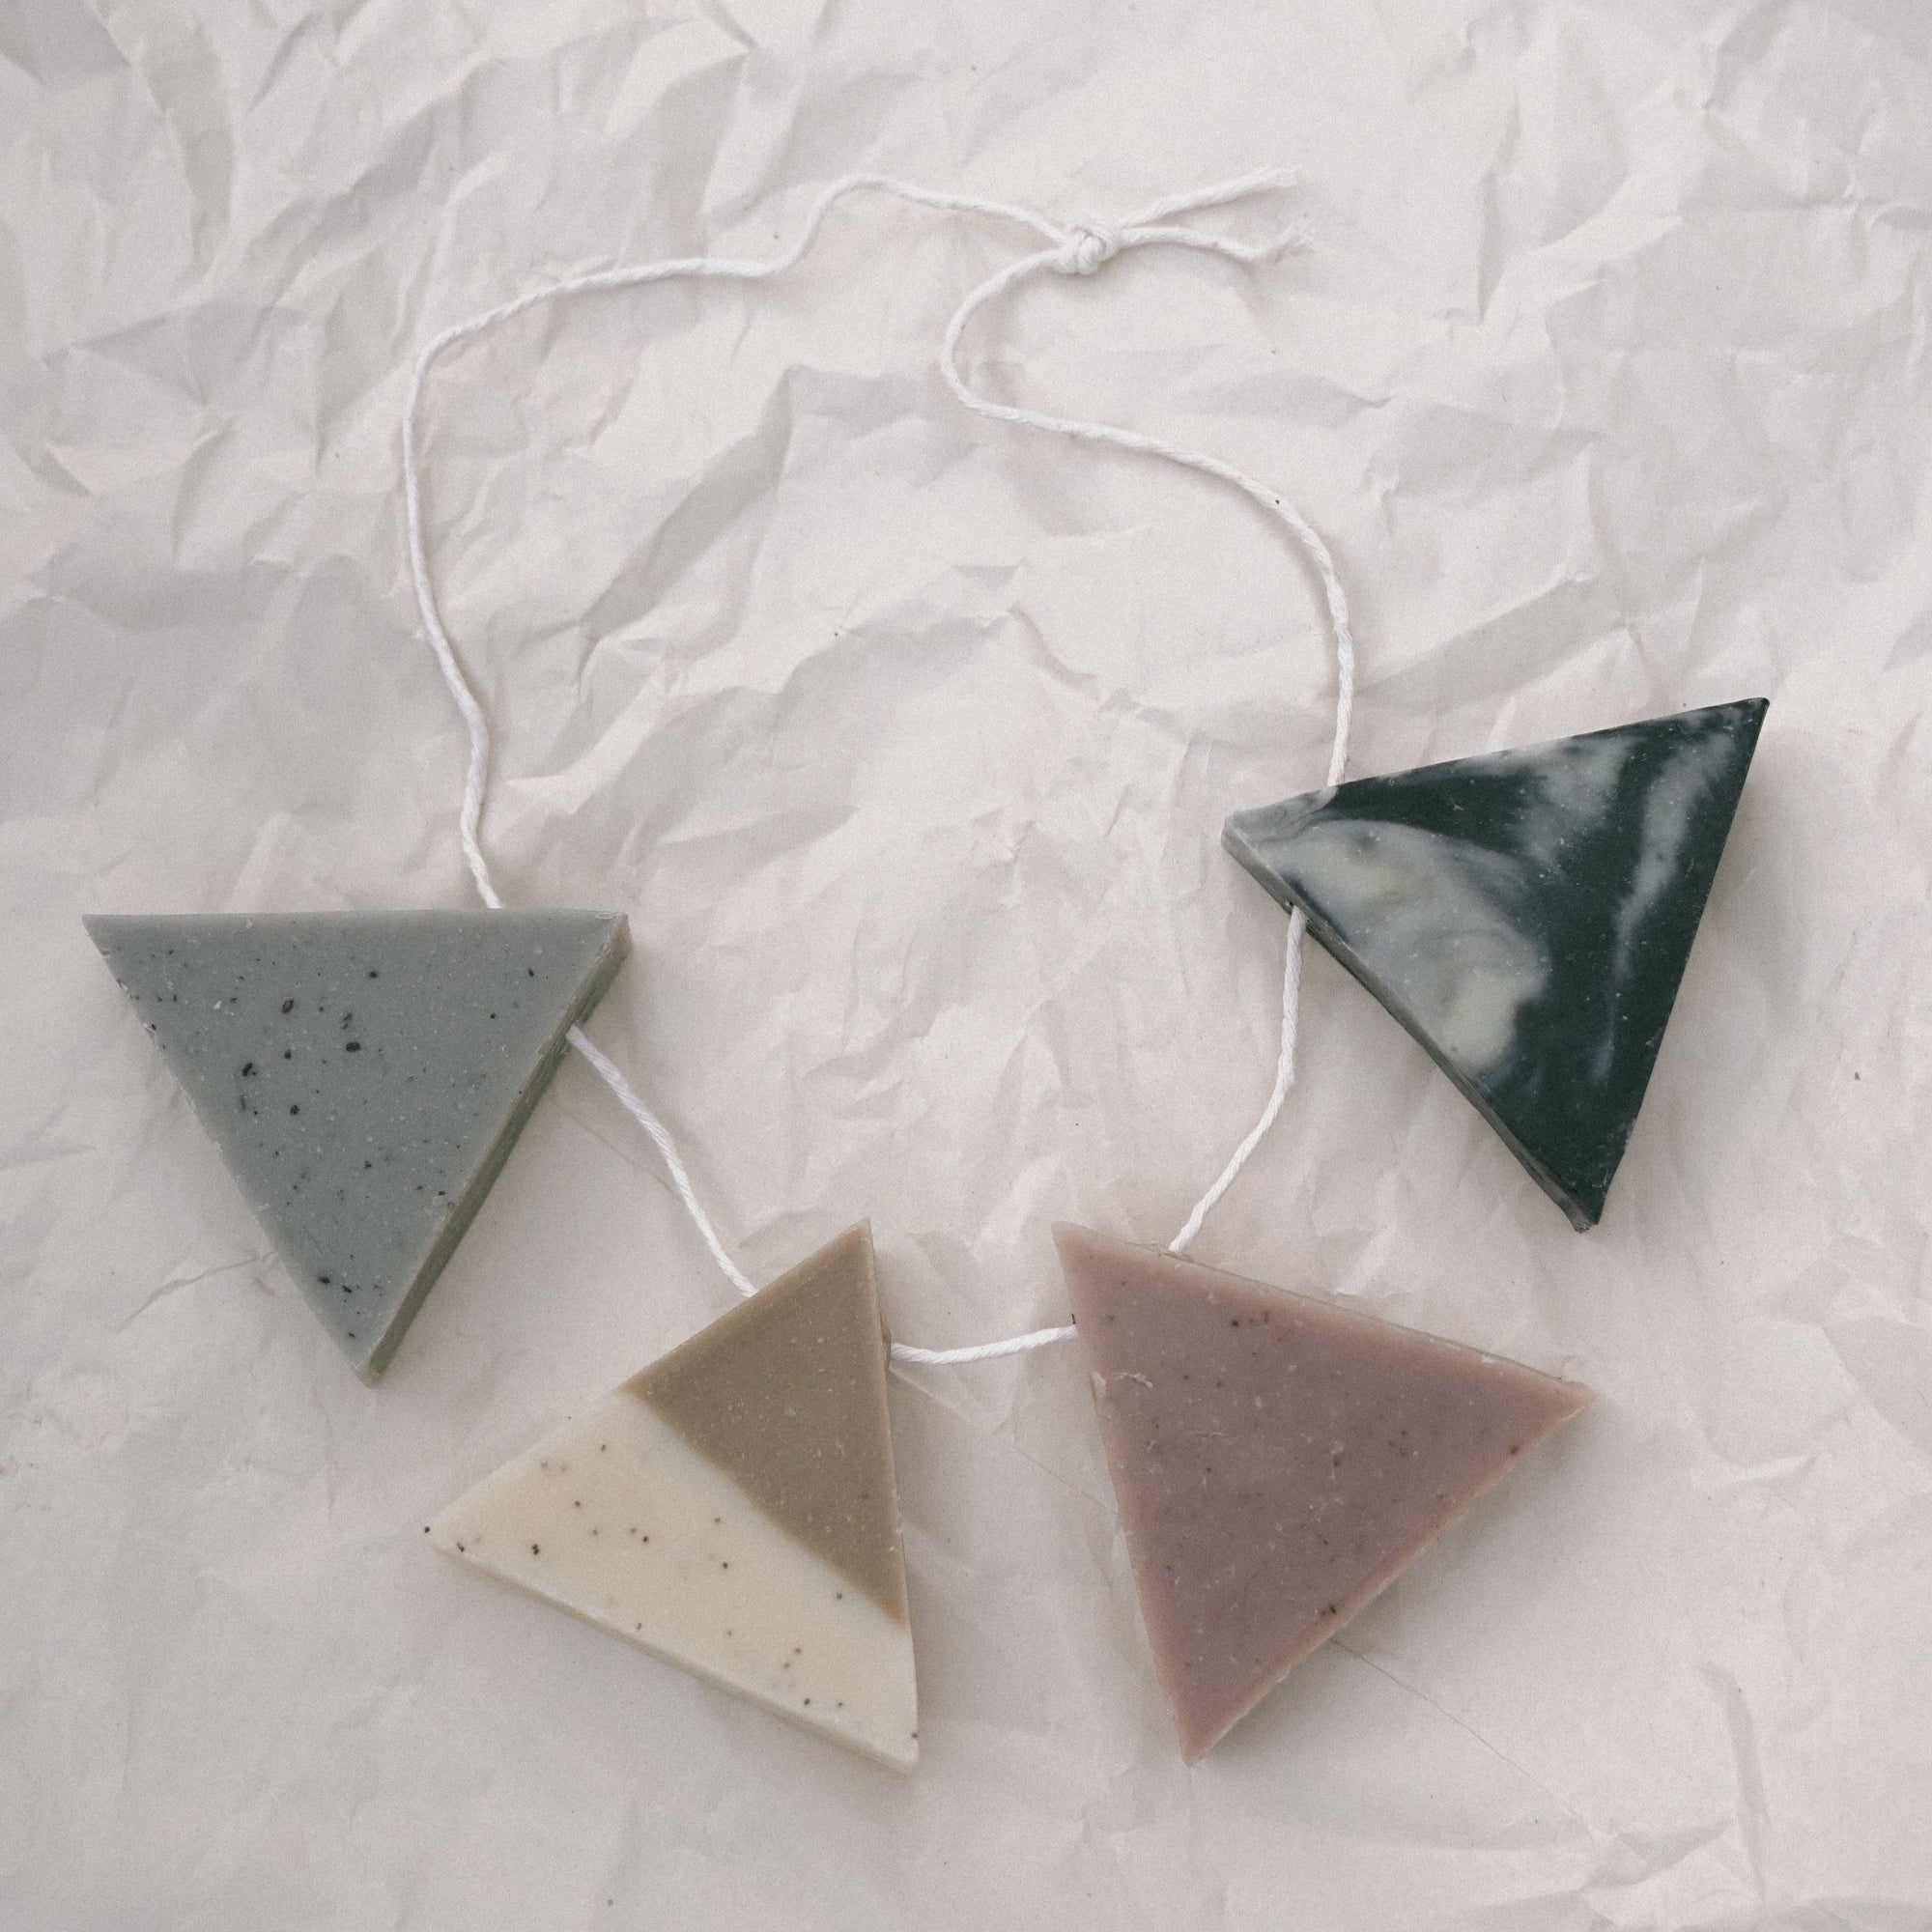 A necklace of four triangle soaps against crinkled white paper